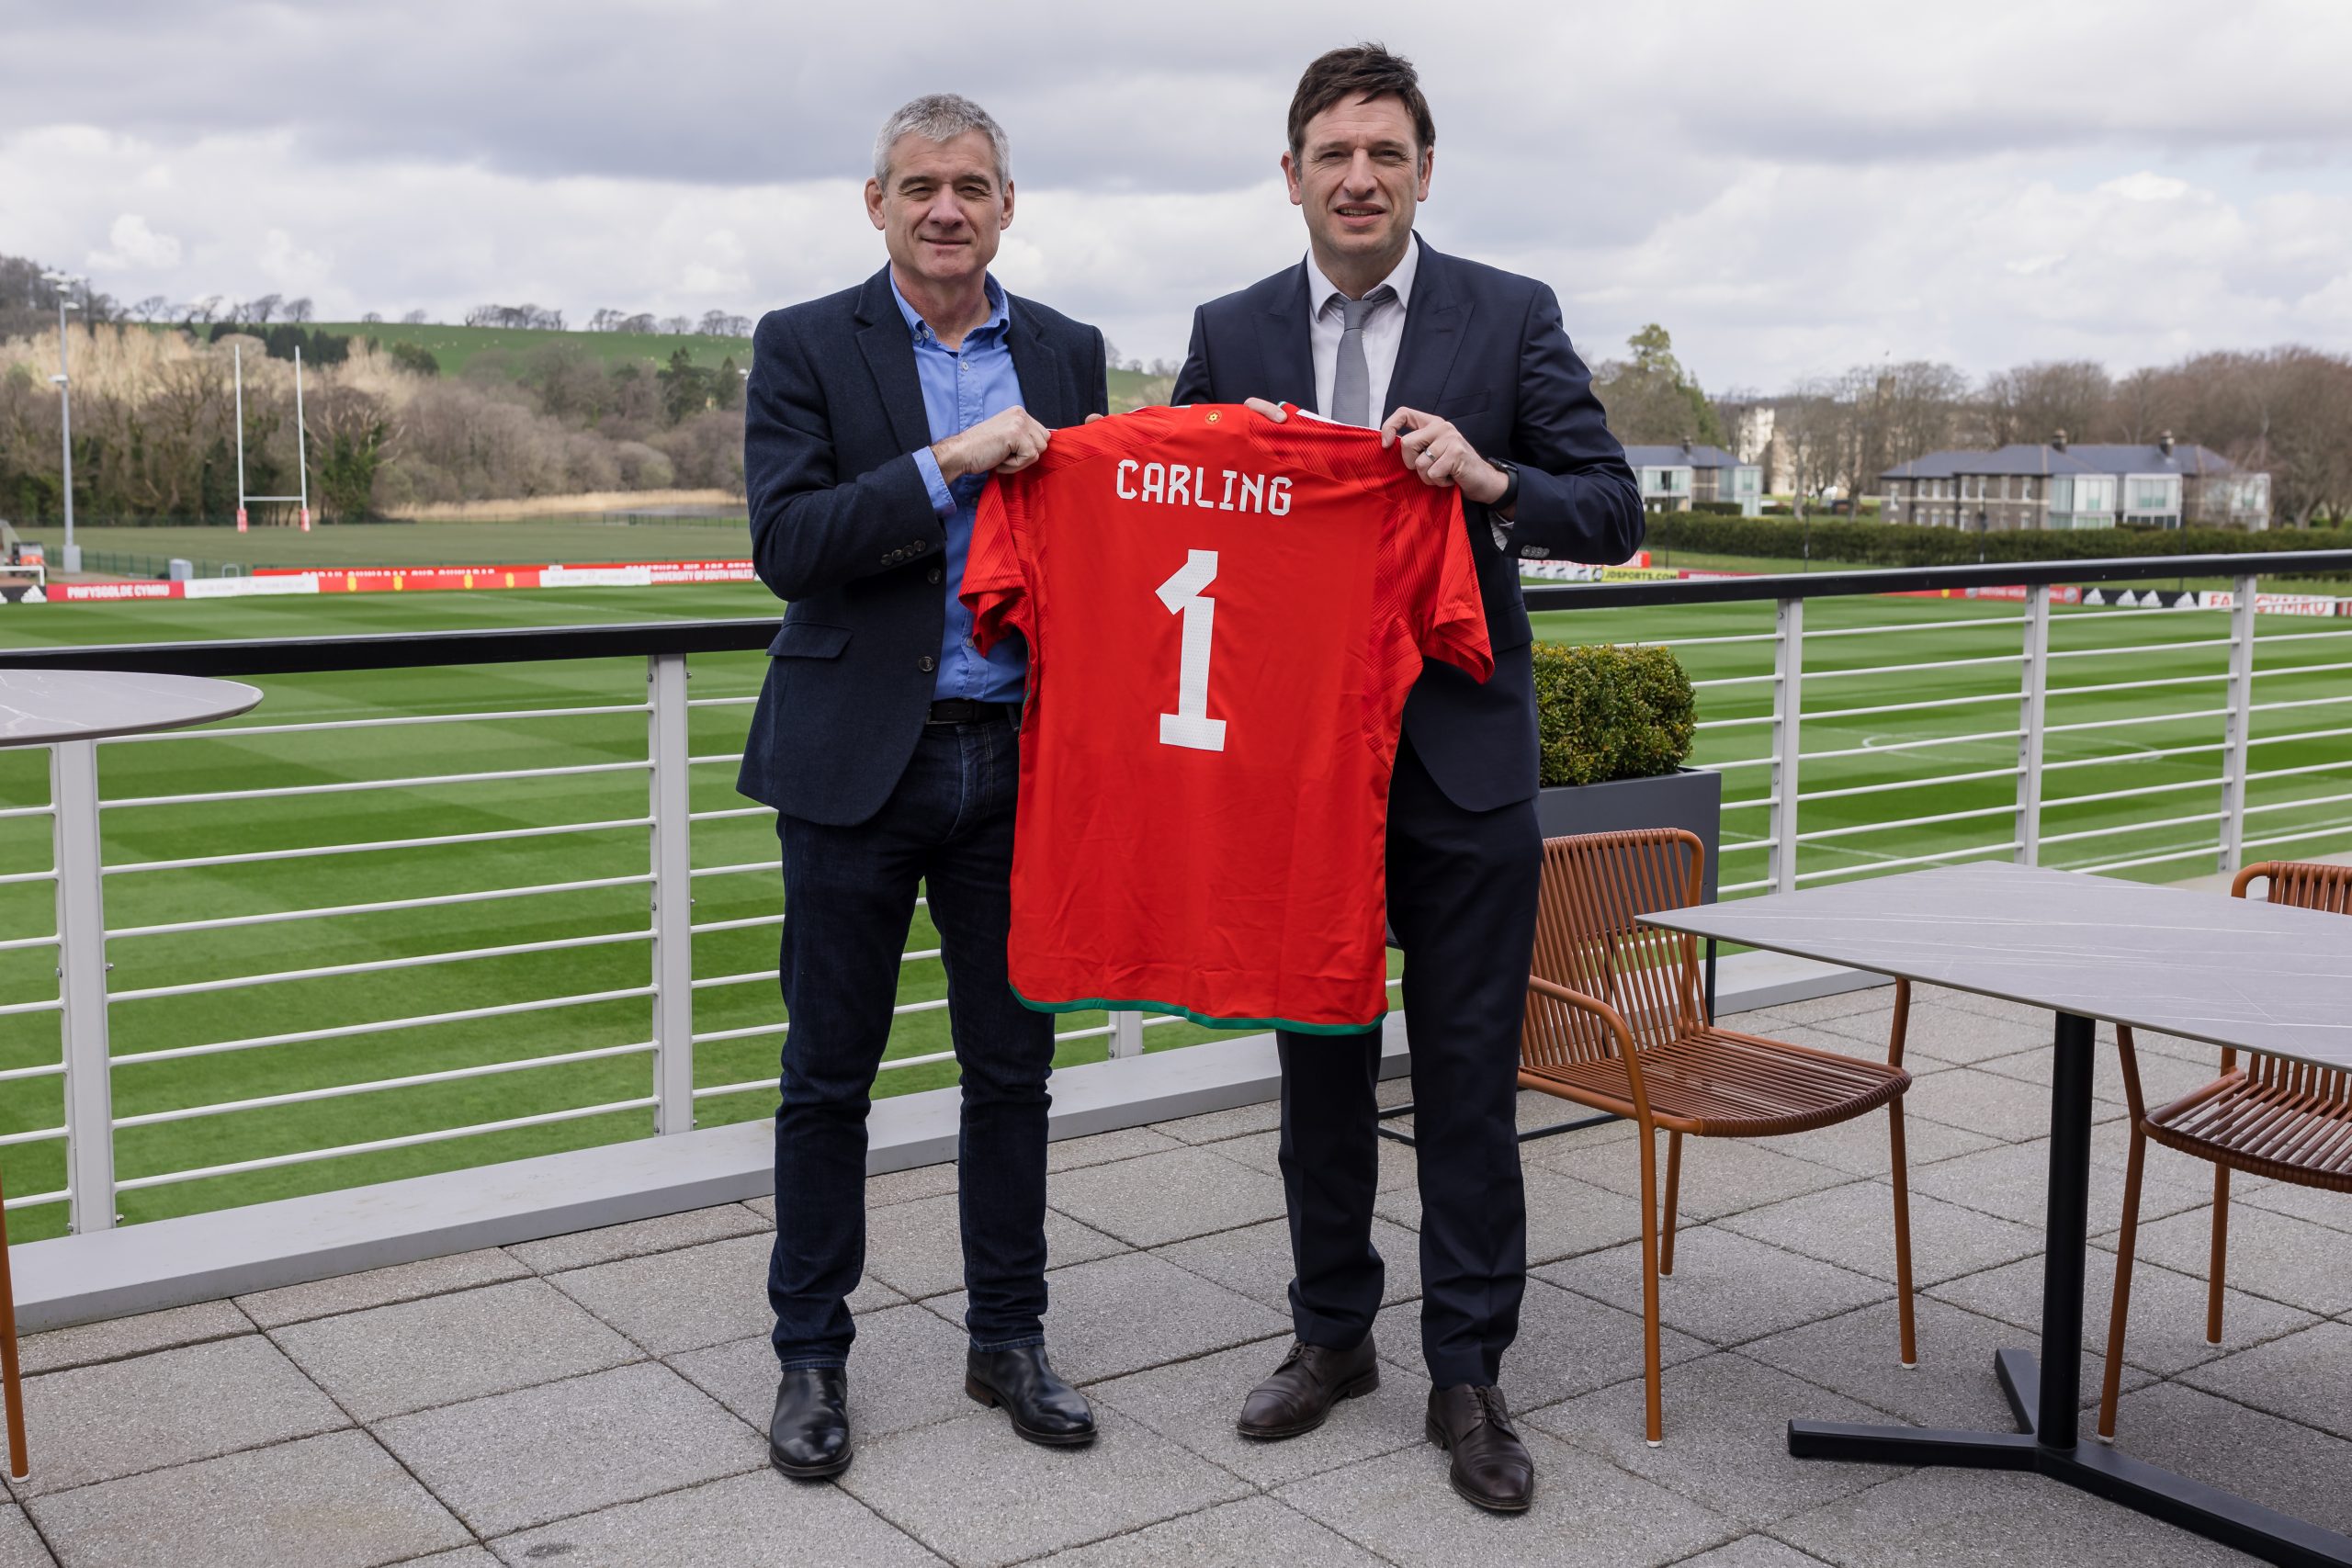 Carling kicks off sponsorship deal with Wales